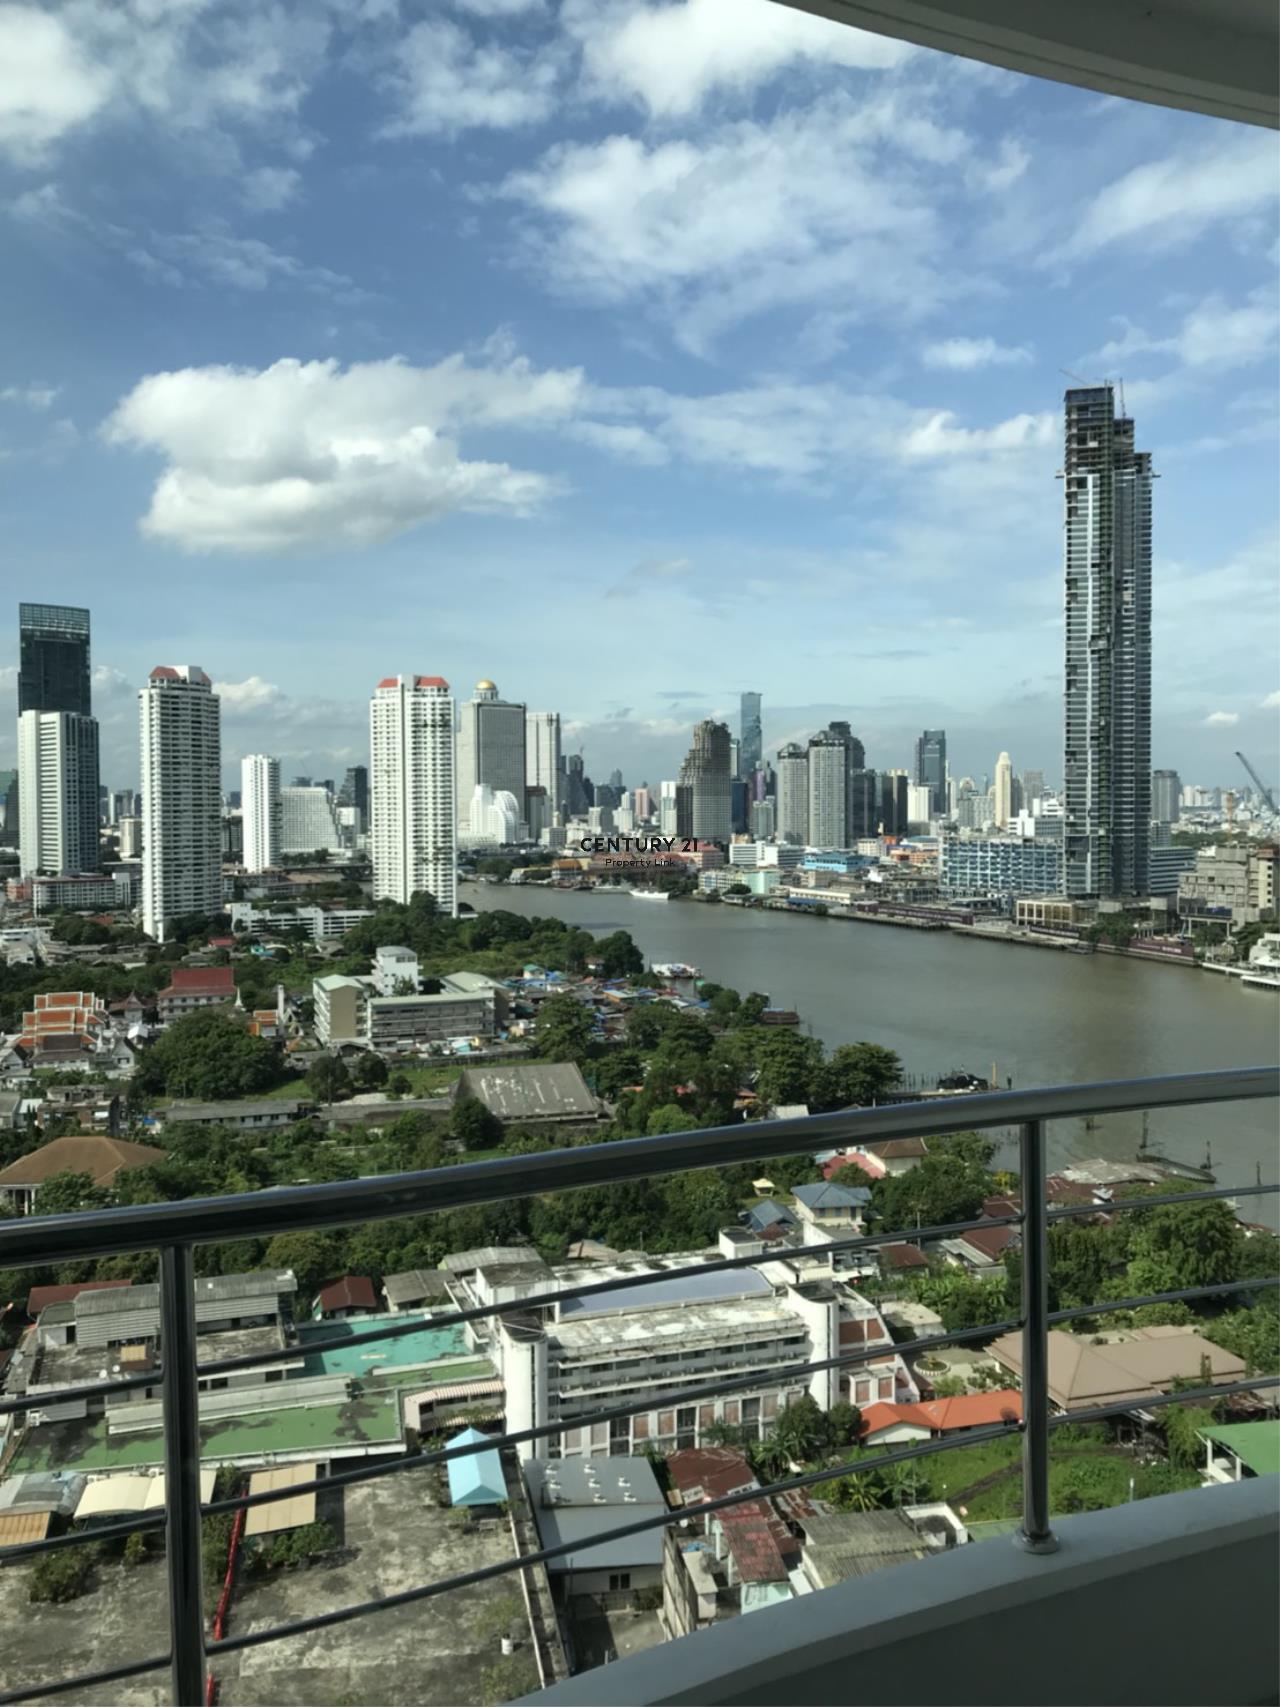 Century21 Property Link Agency's 38-CC-61548 Room for Rent Supalai River Place Condominium  Fully Furnished High level City view near BTS Krung Thon Buri I-con siam 5